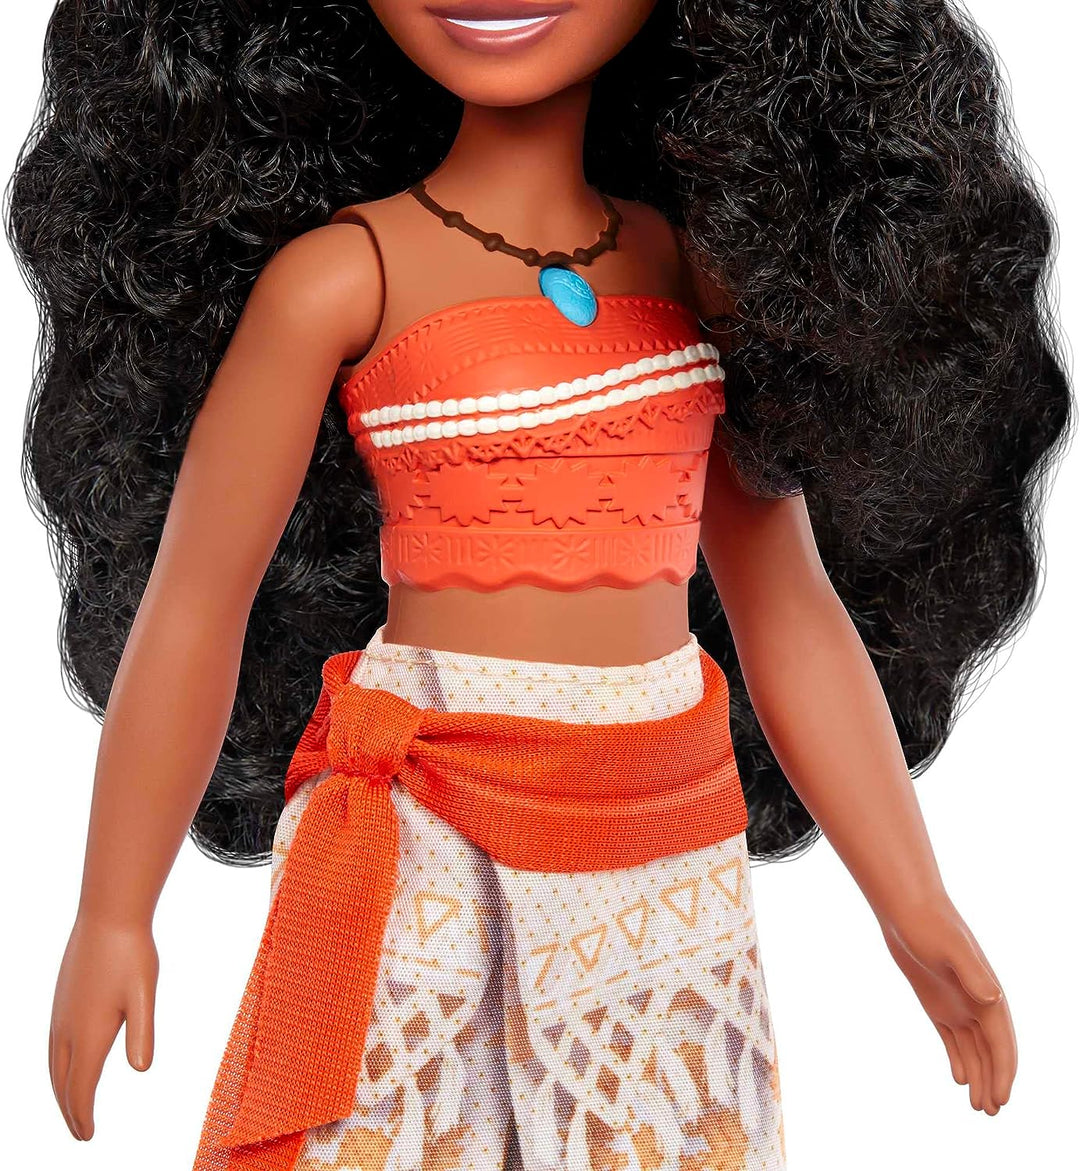 Disney Princess Toys, Singing Moana Doll in Signature Clothing, Sings “How Far I’ll Go” From the Disney Movie